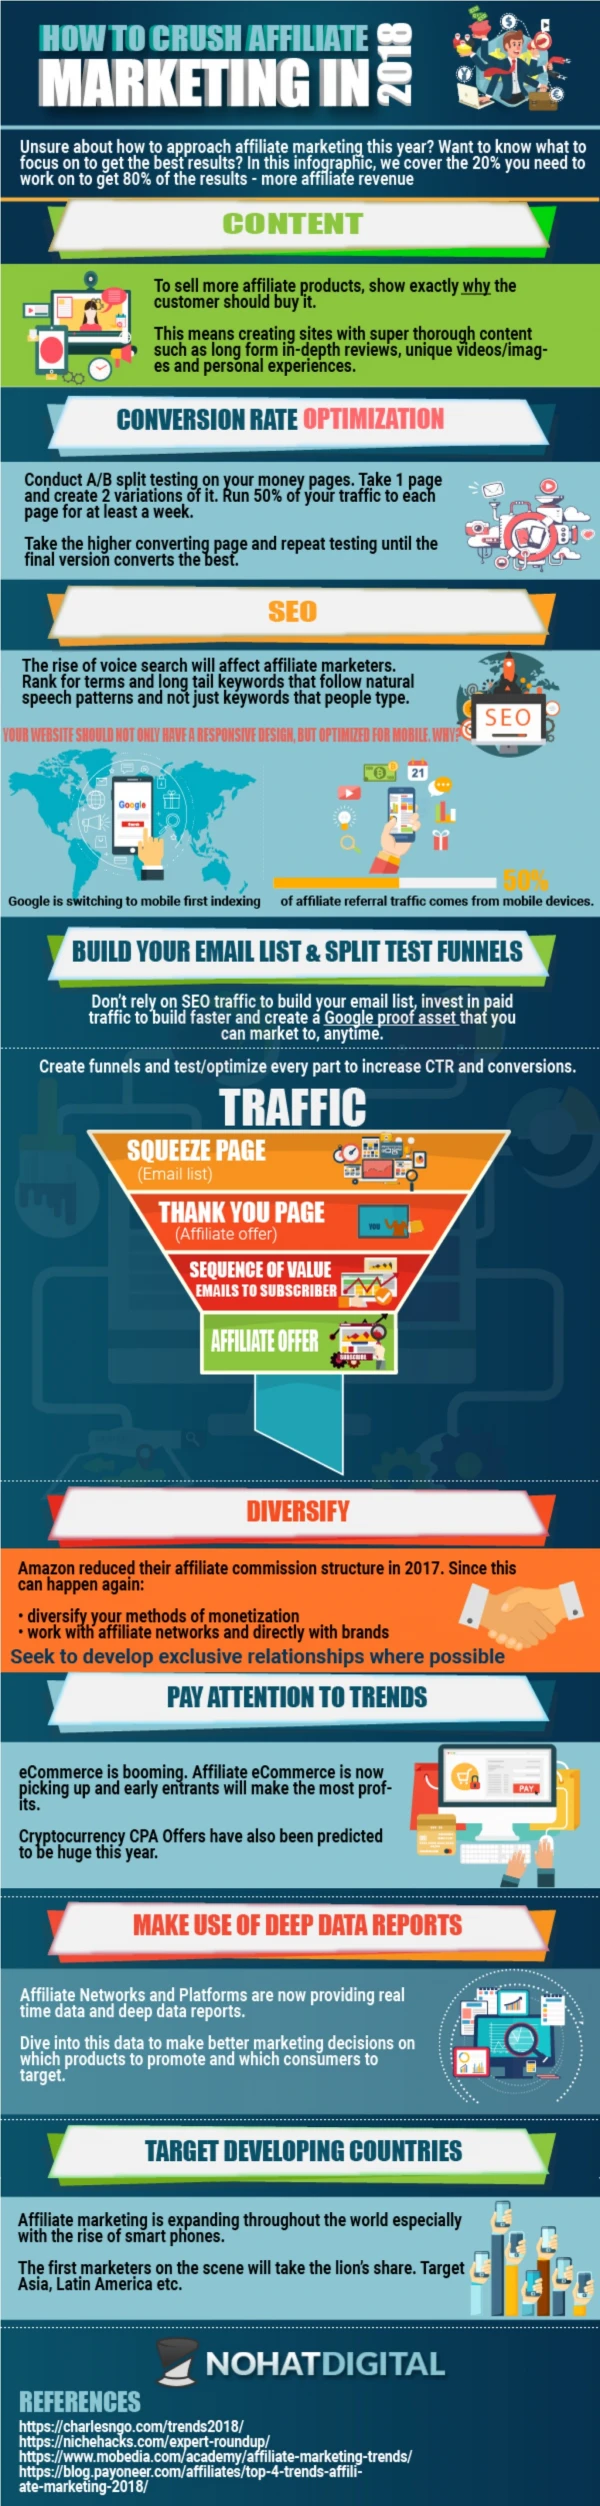 Top Marketing Infographics on the Internet in 2018